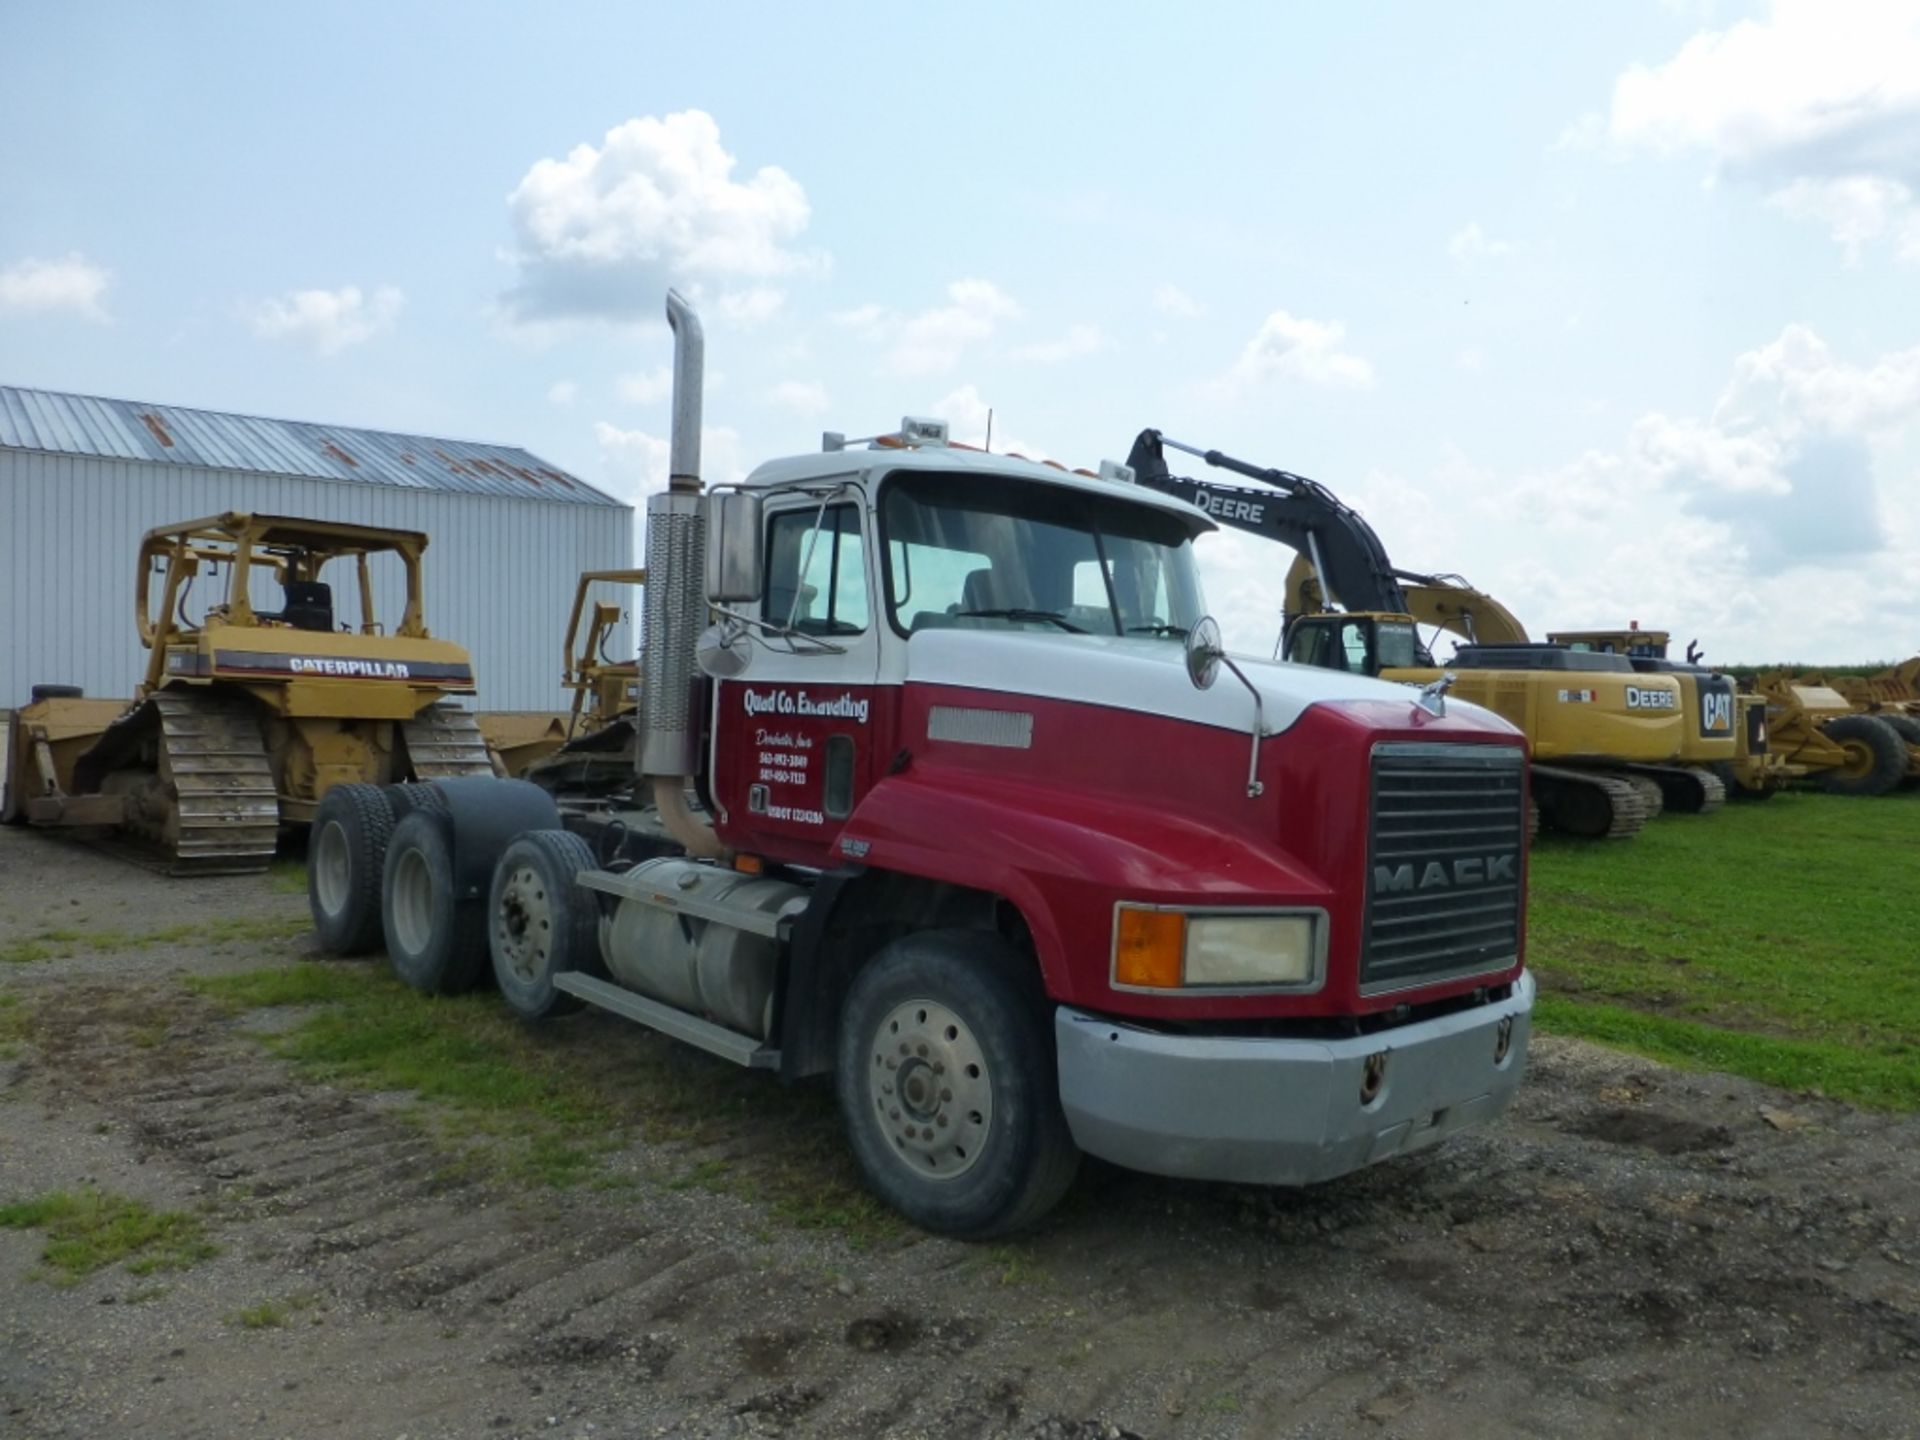 2000 Mack Truck Country 613CH, 3 axle, day cab, MaxiTorque T2090 9spd trans, Mack 335hp engine. E7- - Image 19 of 25